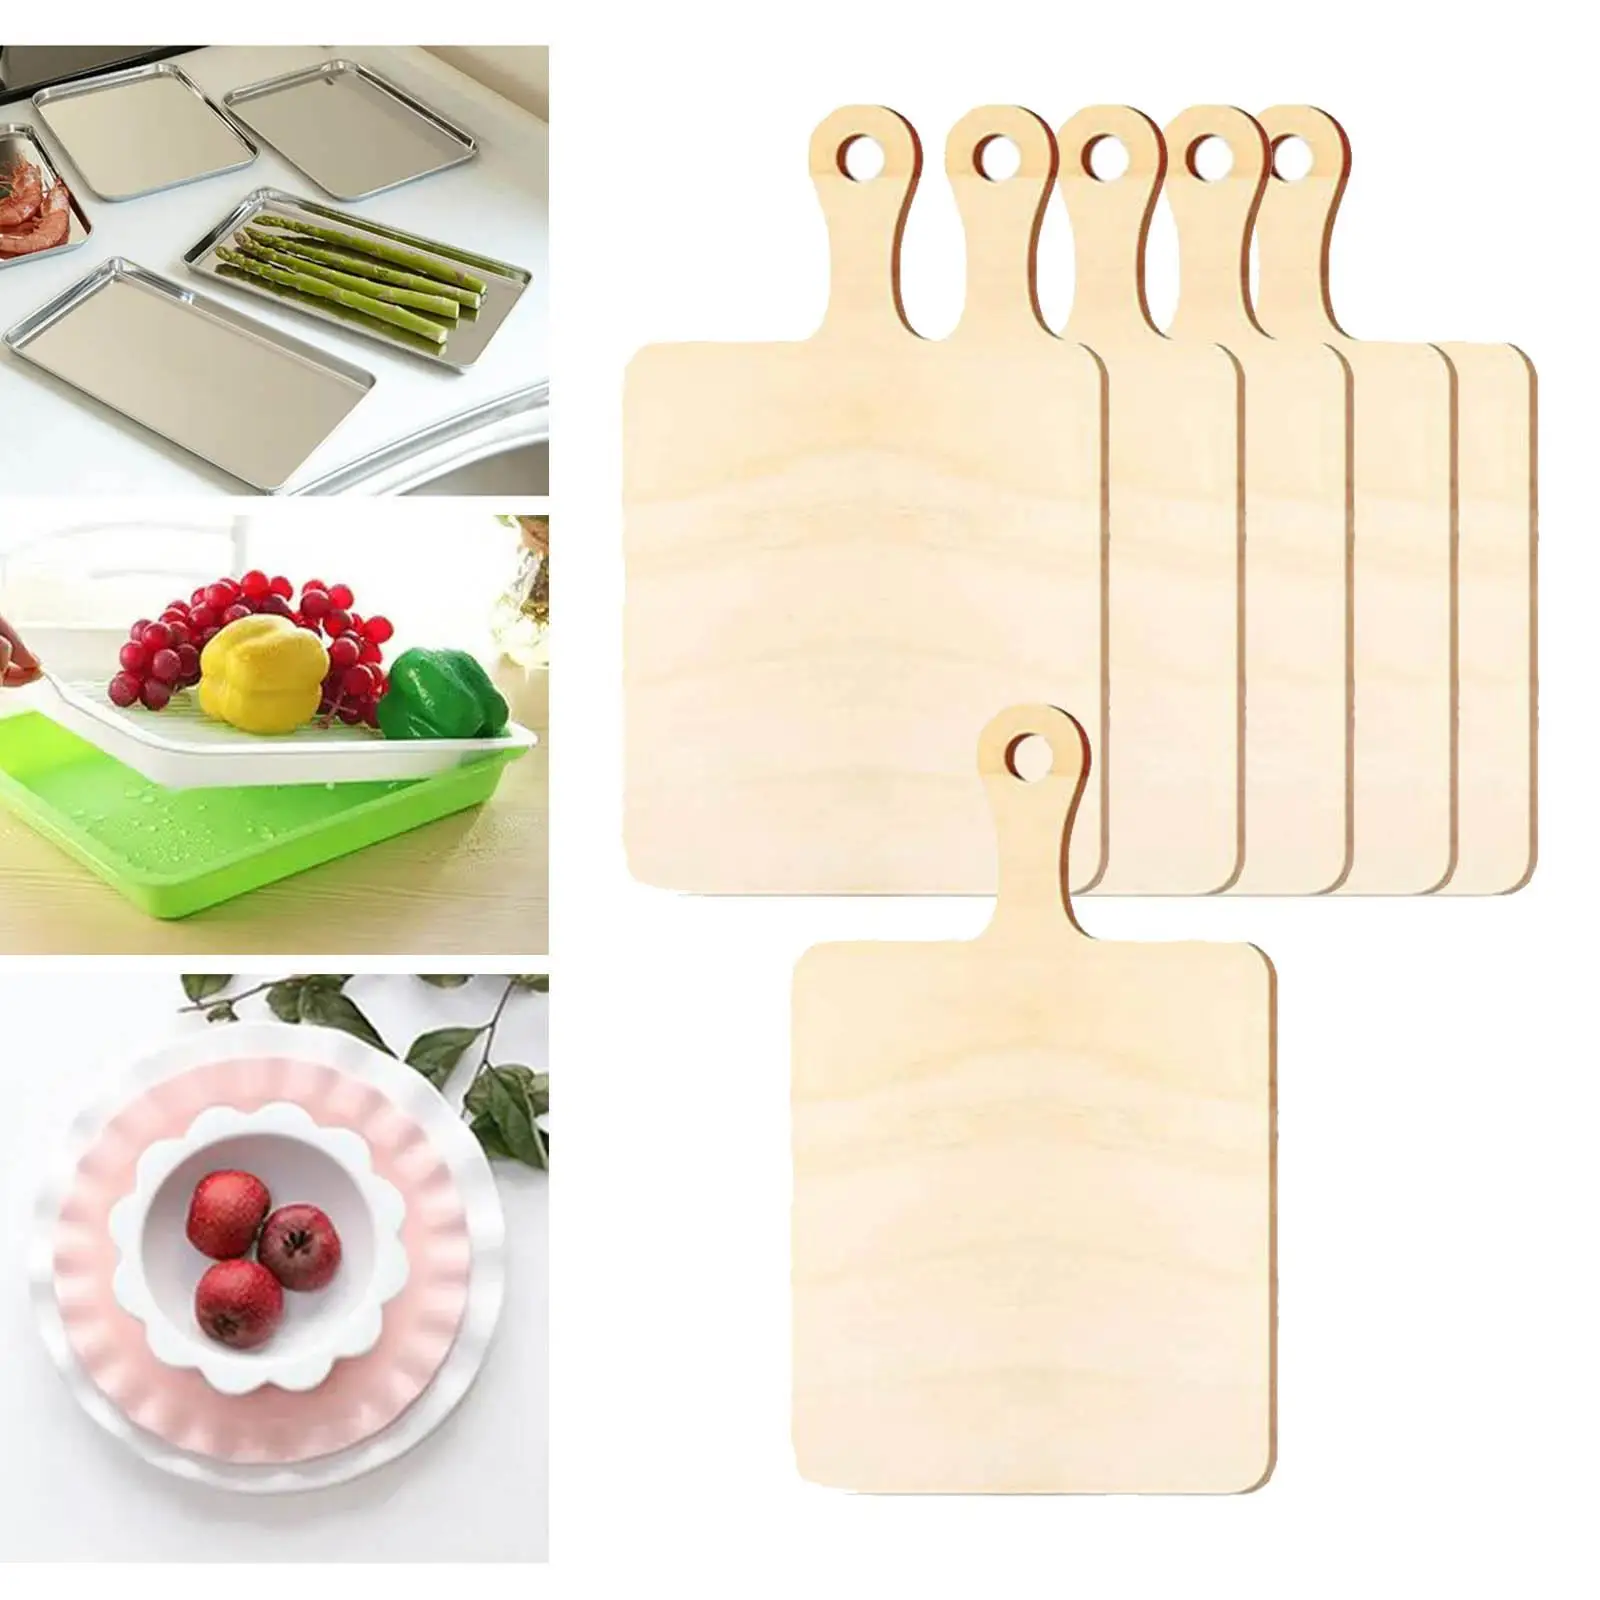 6x Small Cutting Board Chopping Board Set Vegetables Bread Board for Kitchen